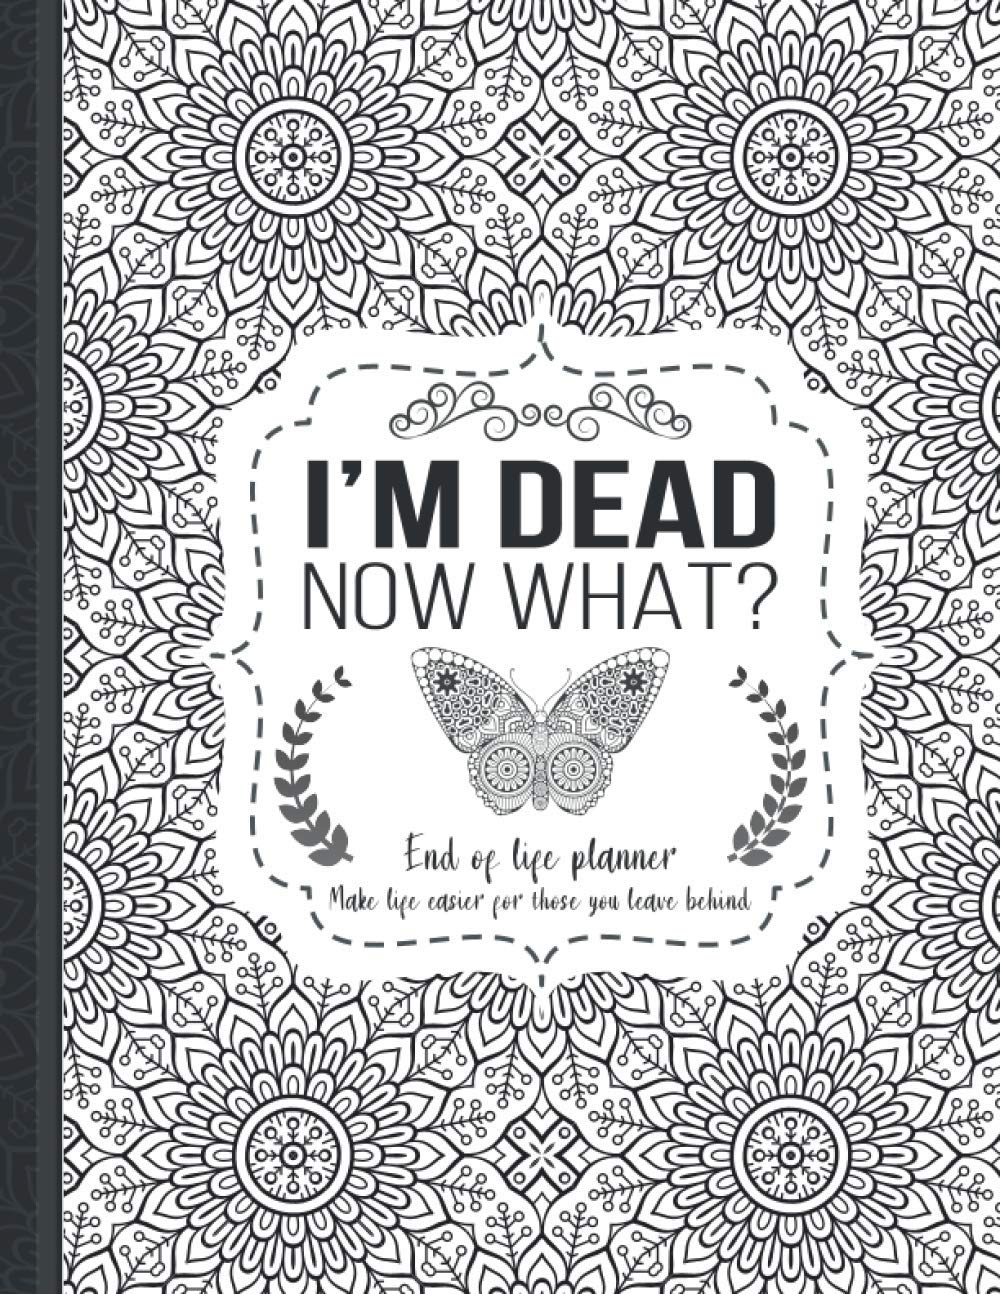 I'm dead now what?, TH Guides Press